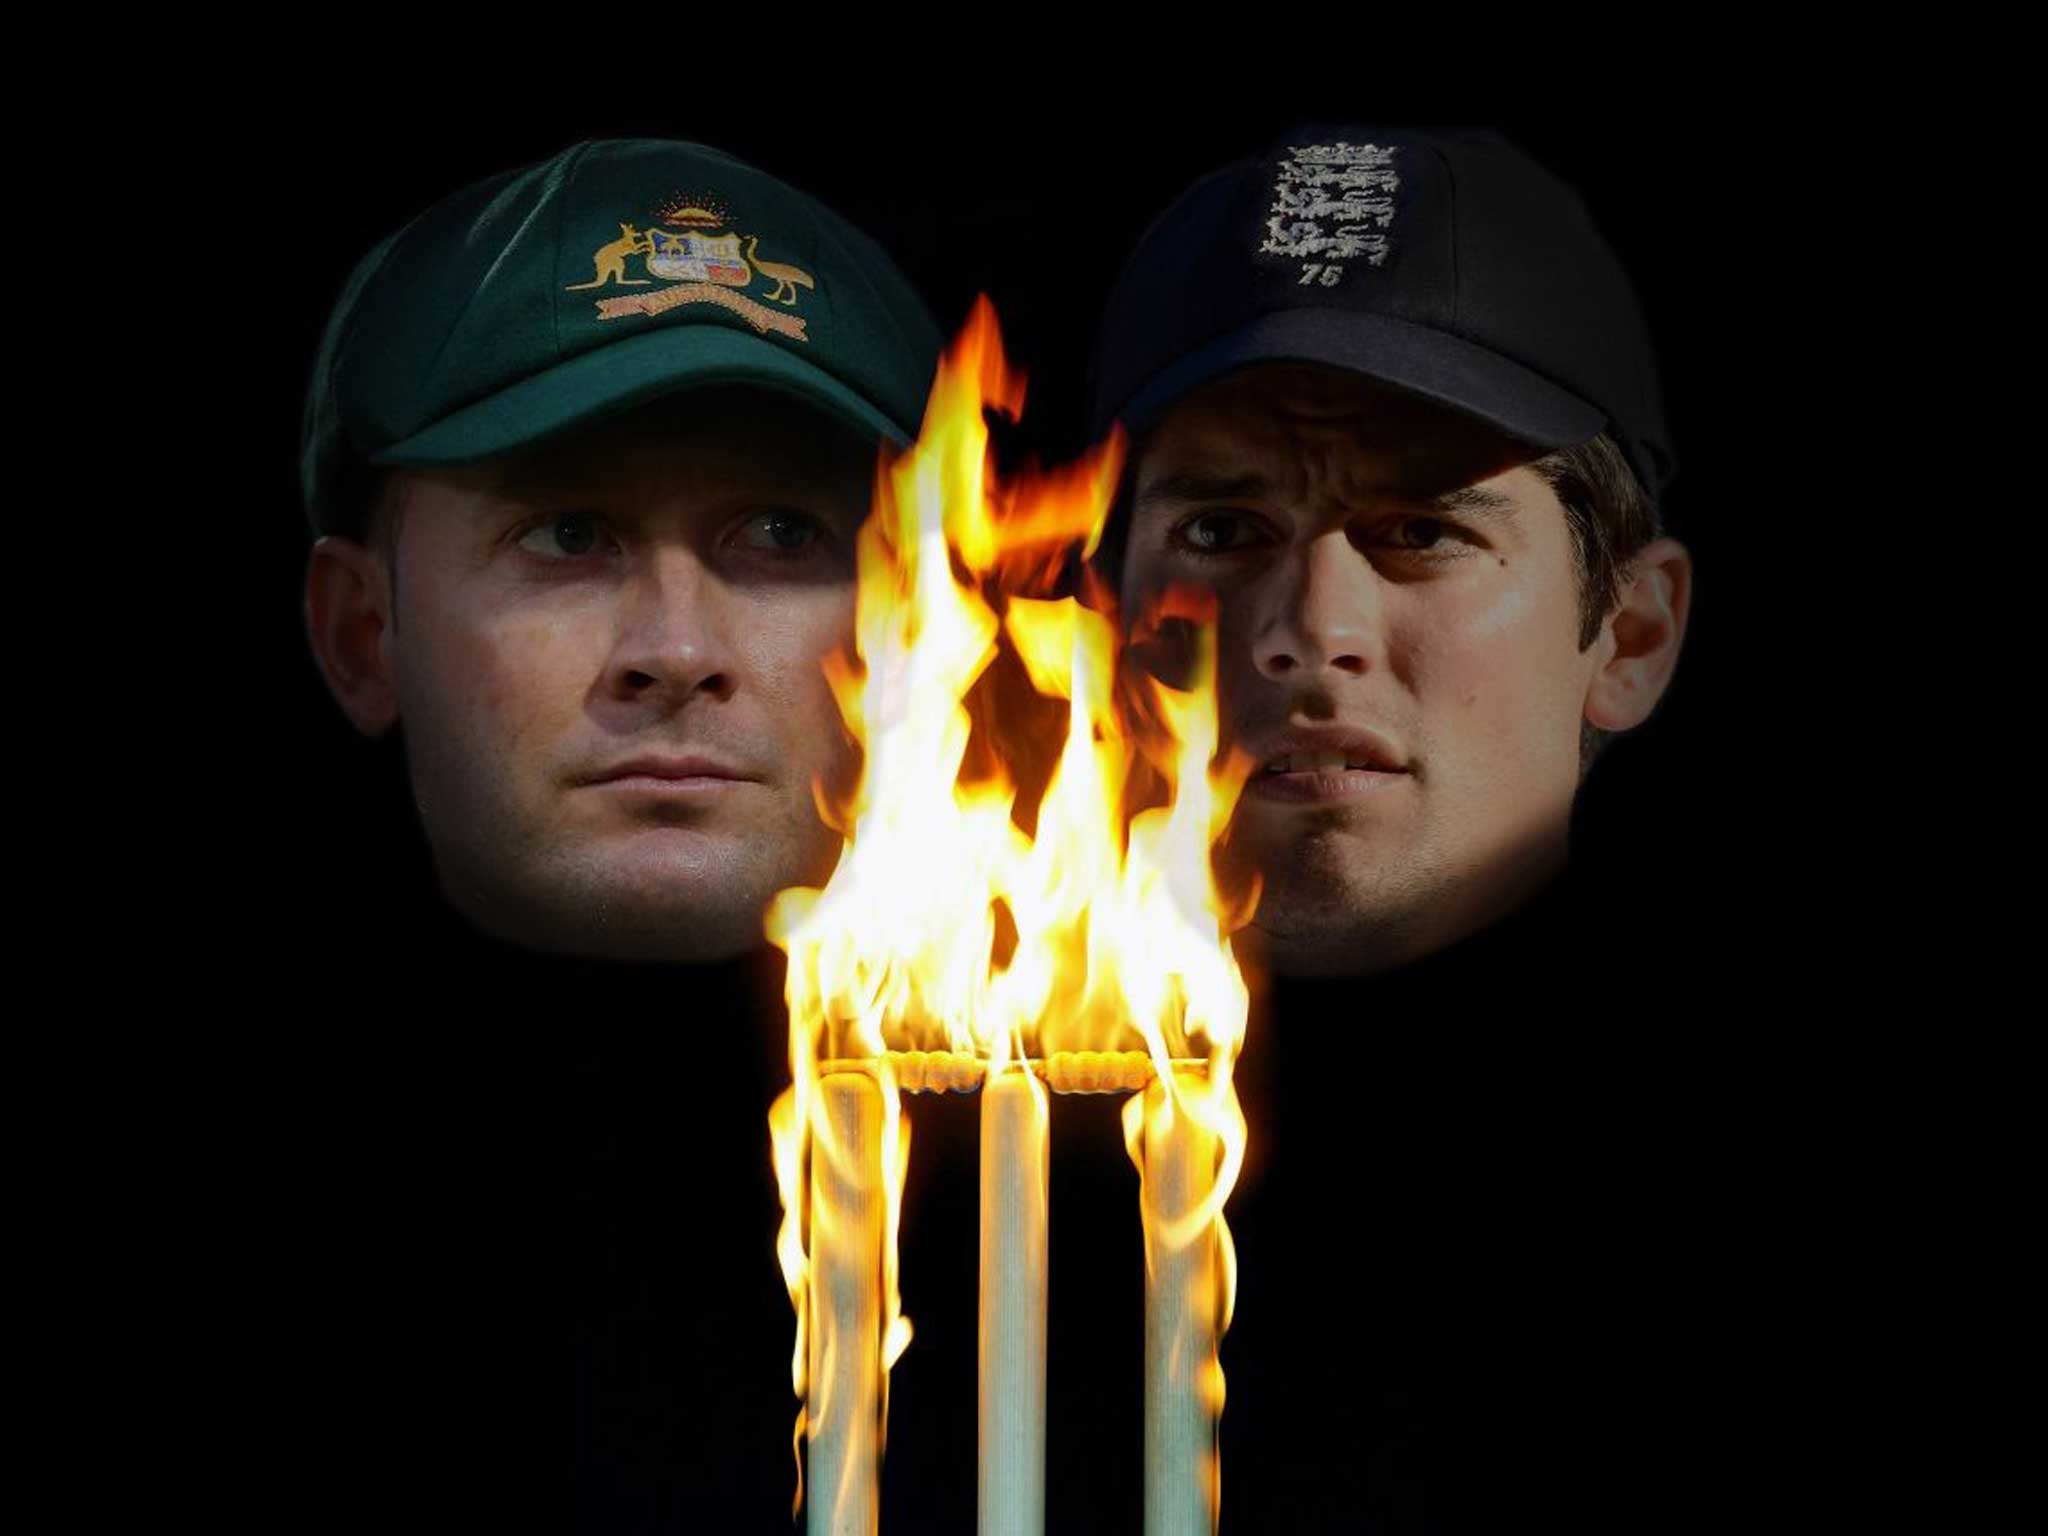 The heat is on England captain Alastair Cook (right) and his Australian counterpart Michael Clarke